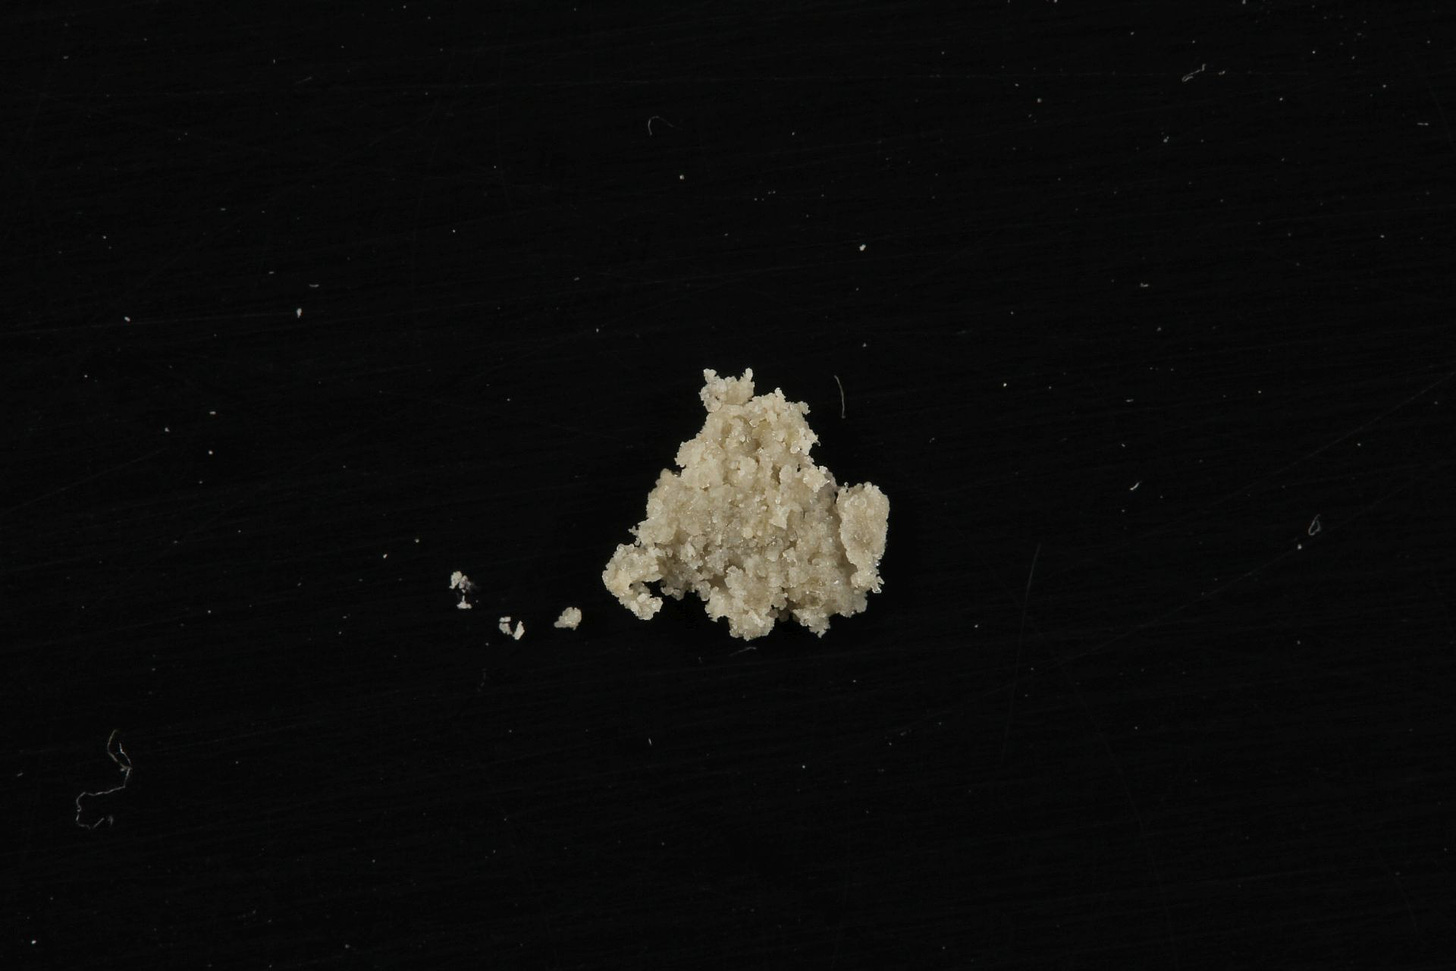 First image of the tested substance